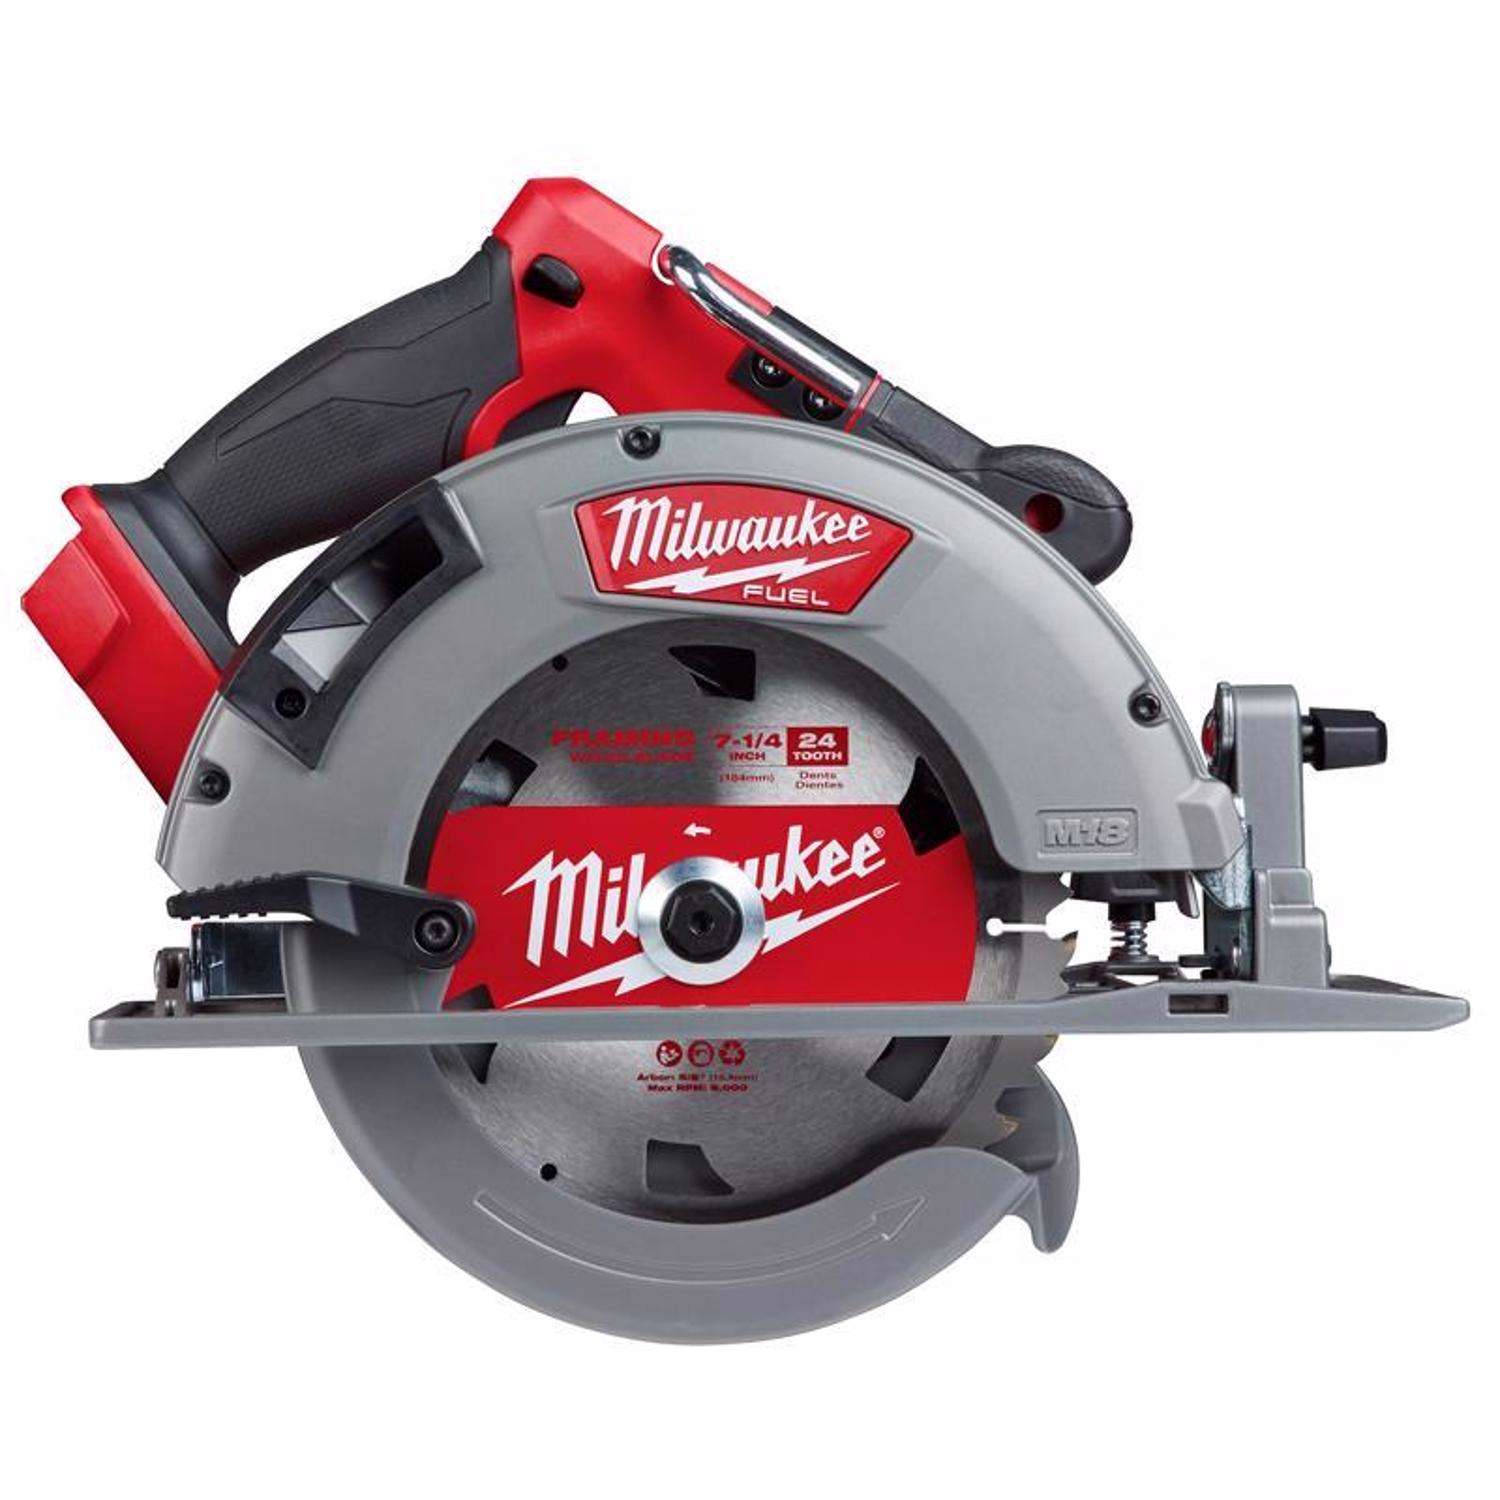 M18 FUEL Metal Cutting Circular Saw No Charger, No Battery, Bare Tool Only - 1